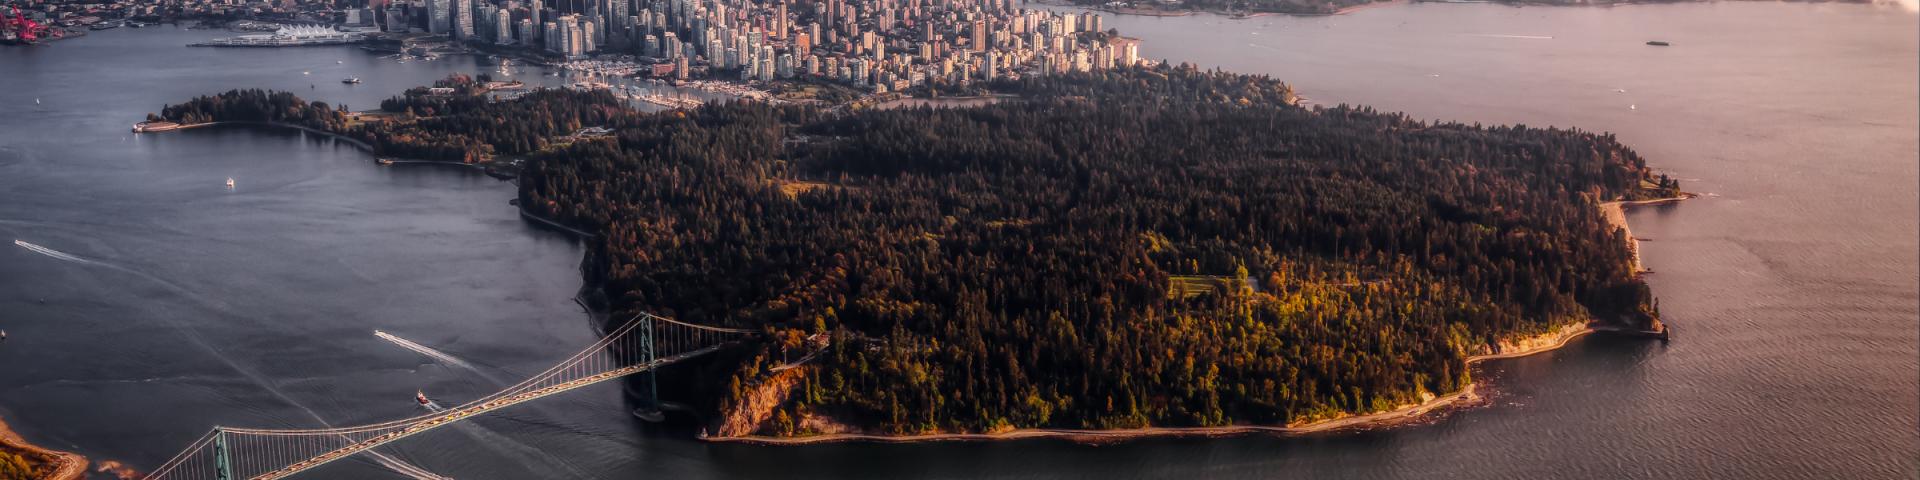 Ariel Shot of Downtown Vancouver